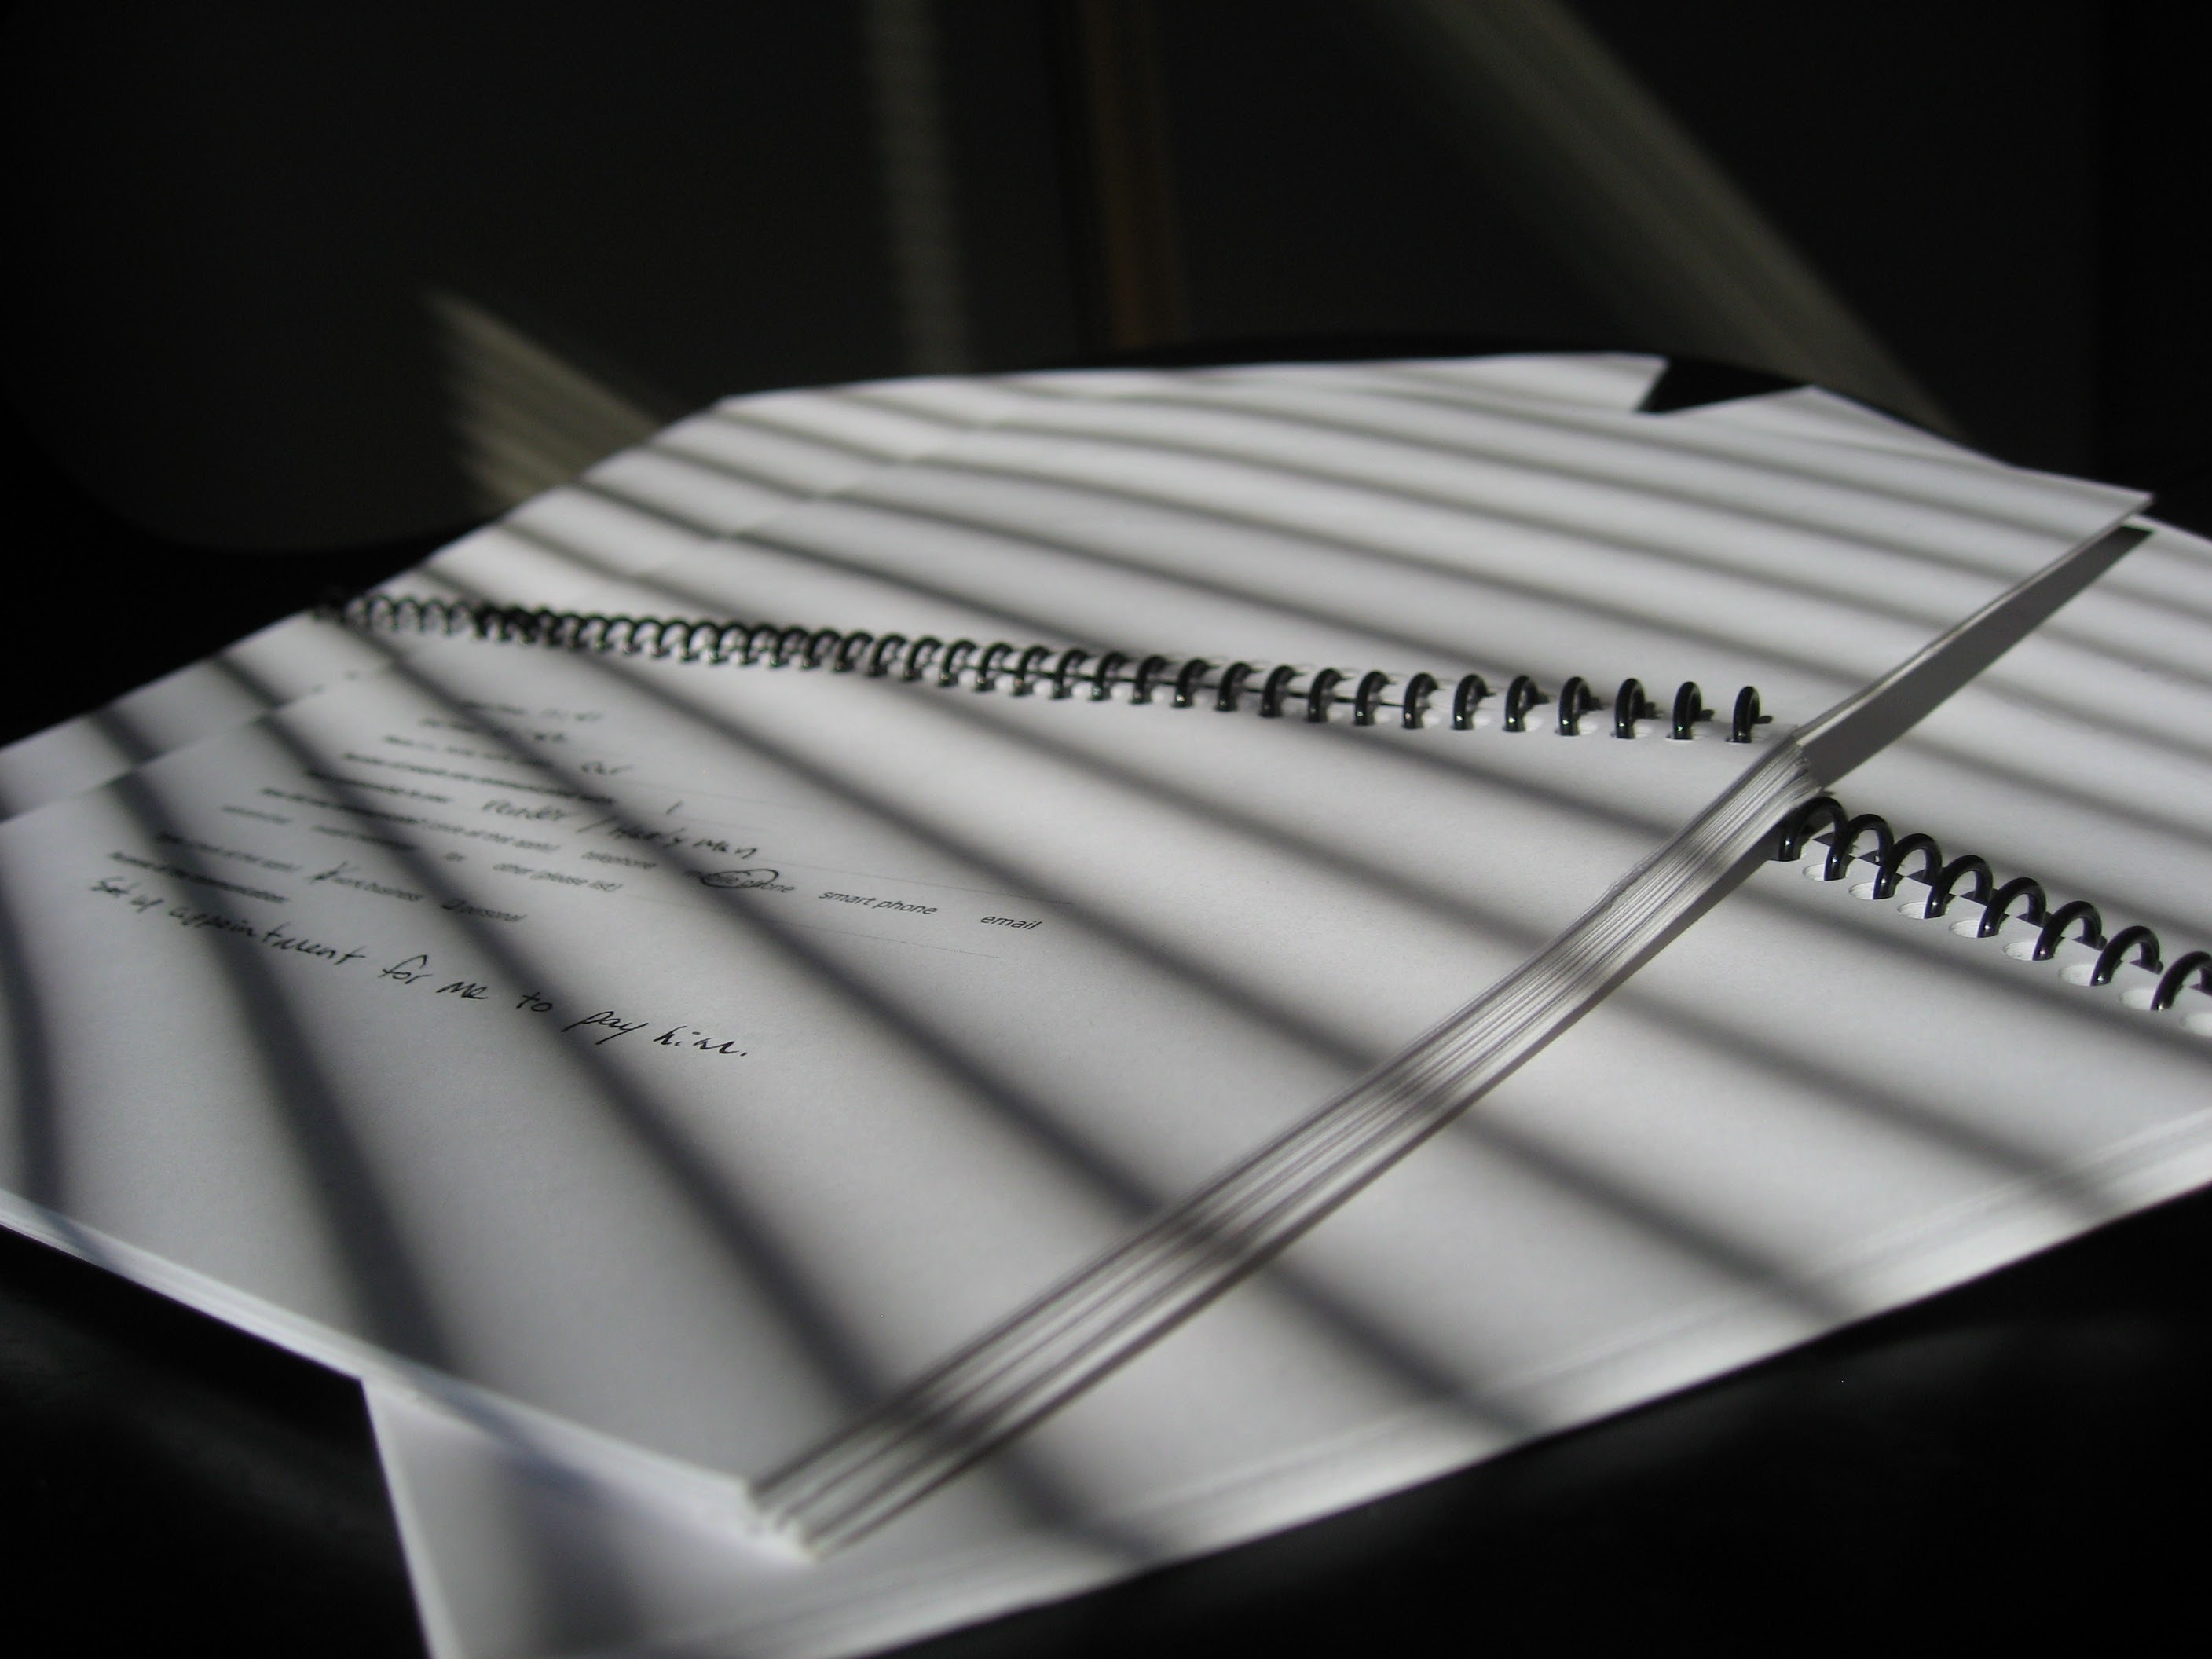 Shadows falling on a group of notebooks